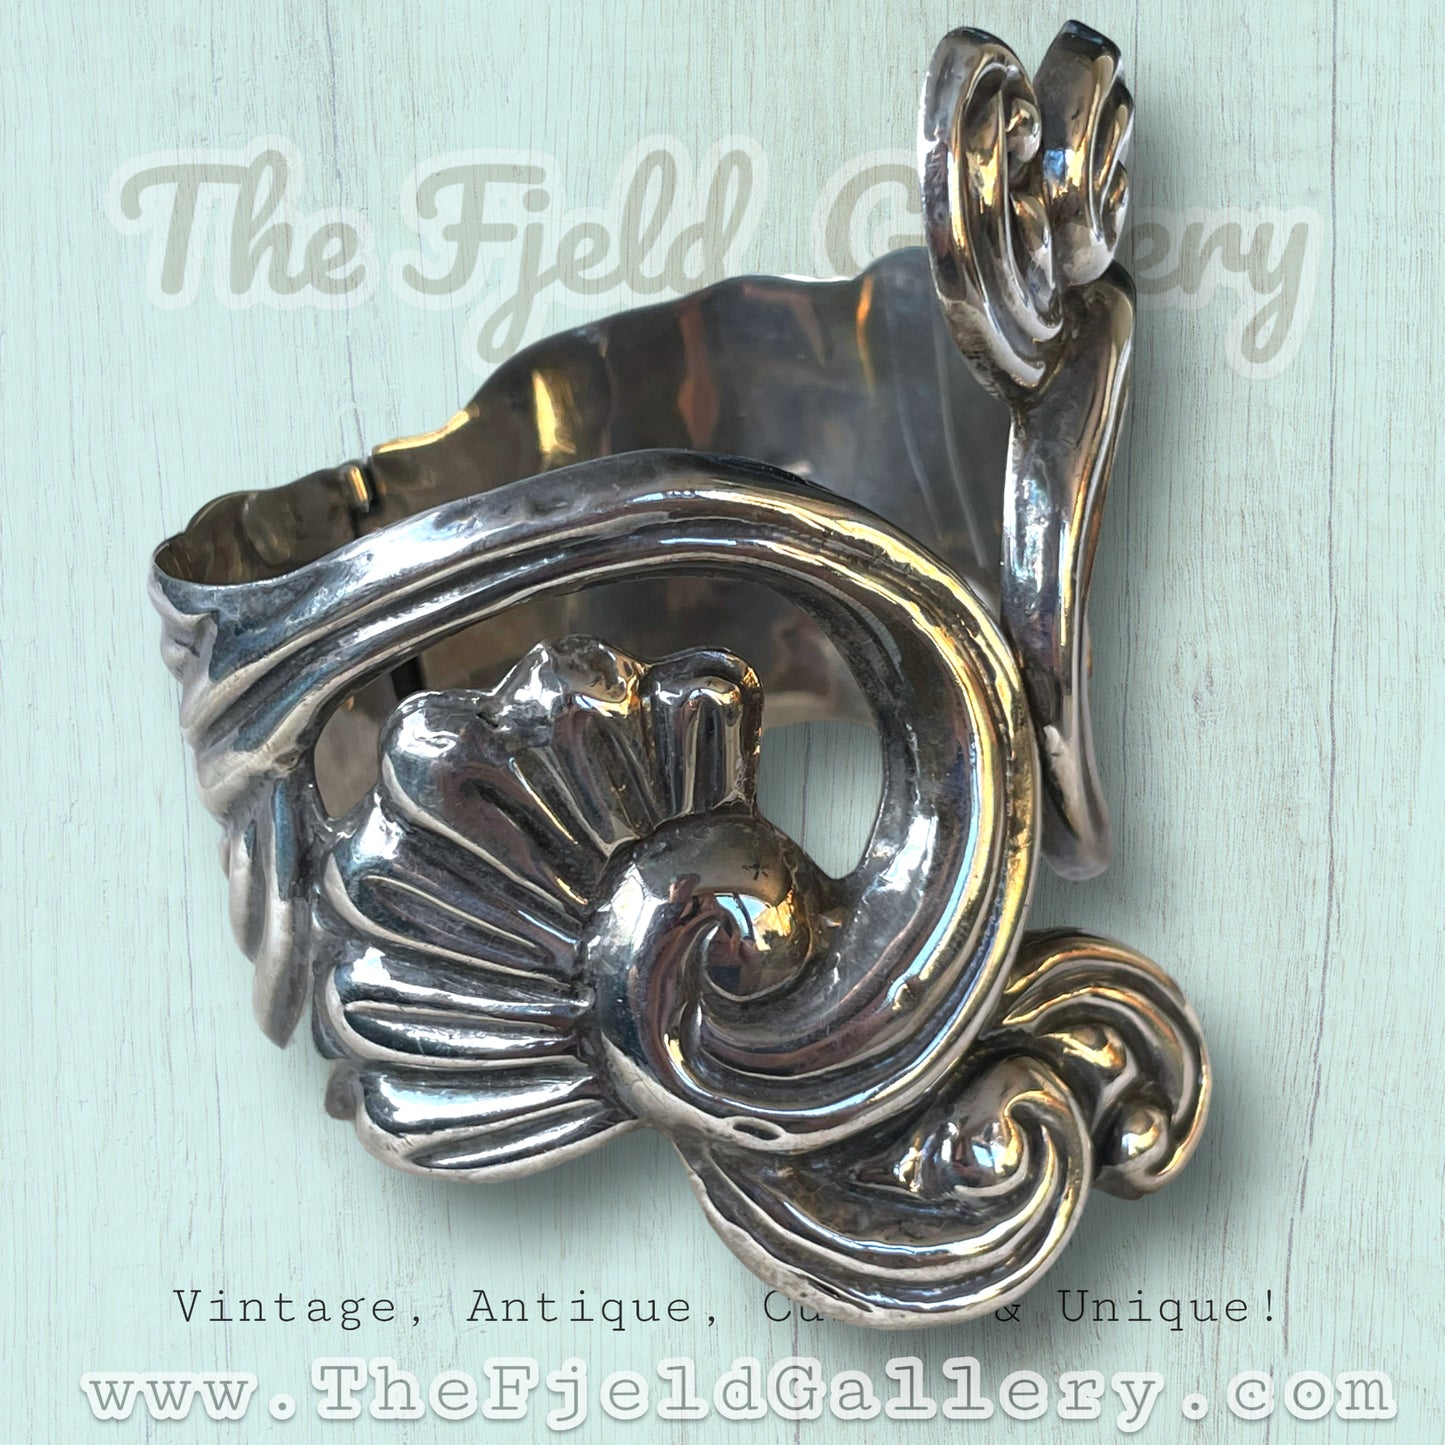 Vintage Sterling Silver Repoussé Flower Swirl Taxco Mexico Hinged Clamper Bracelet